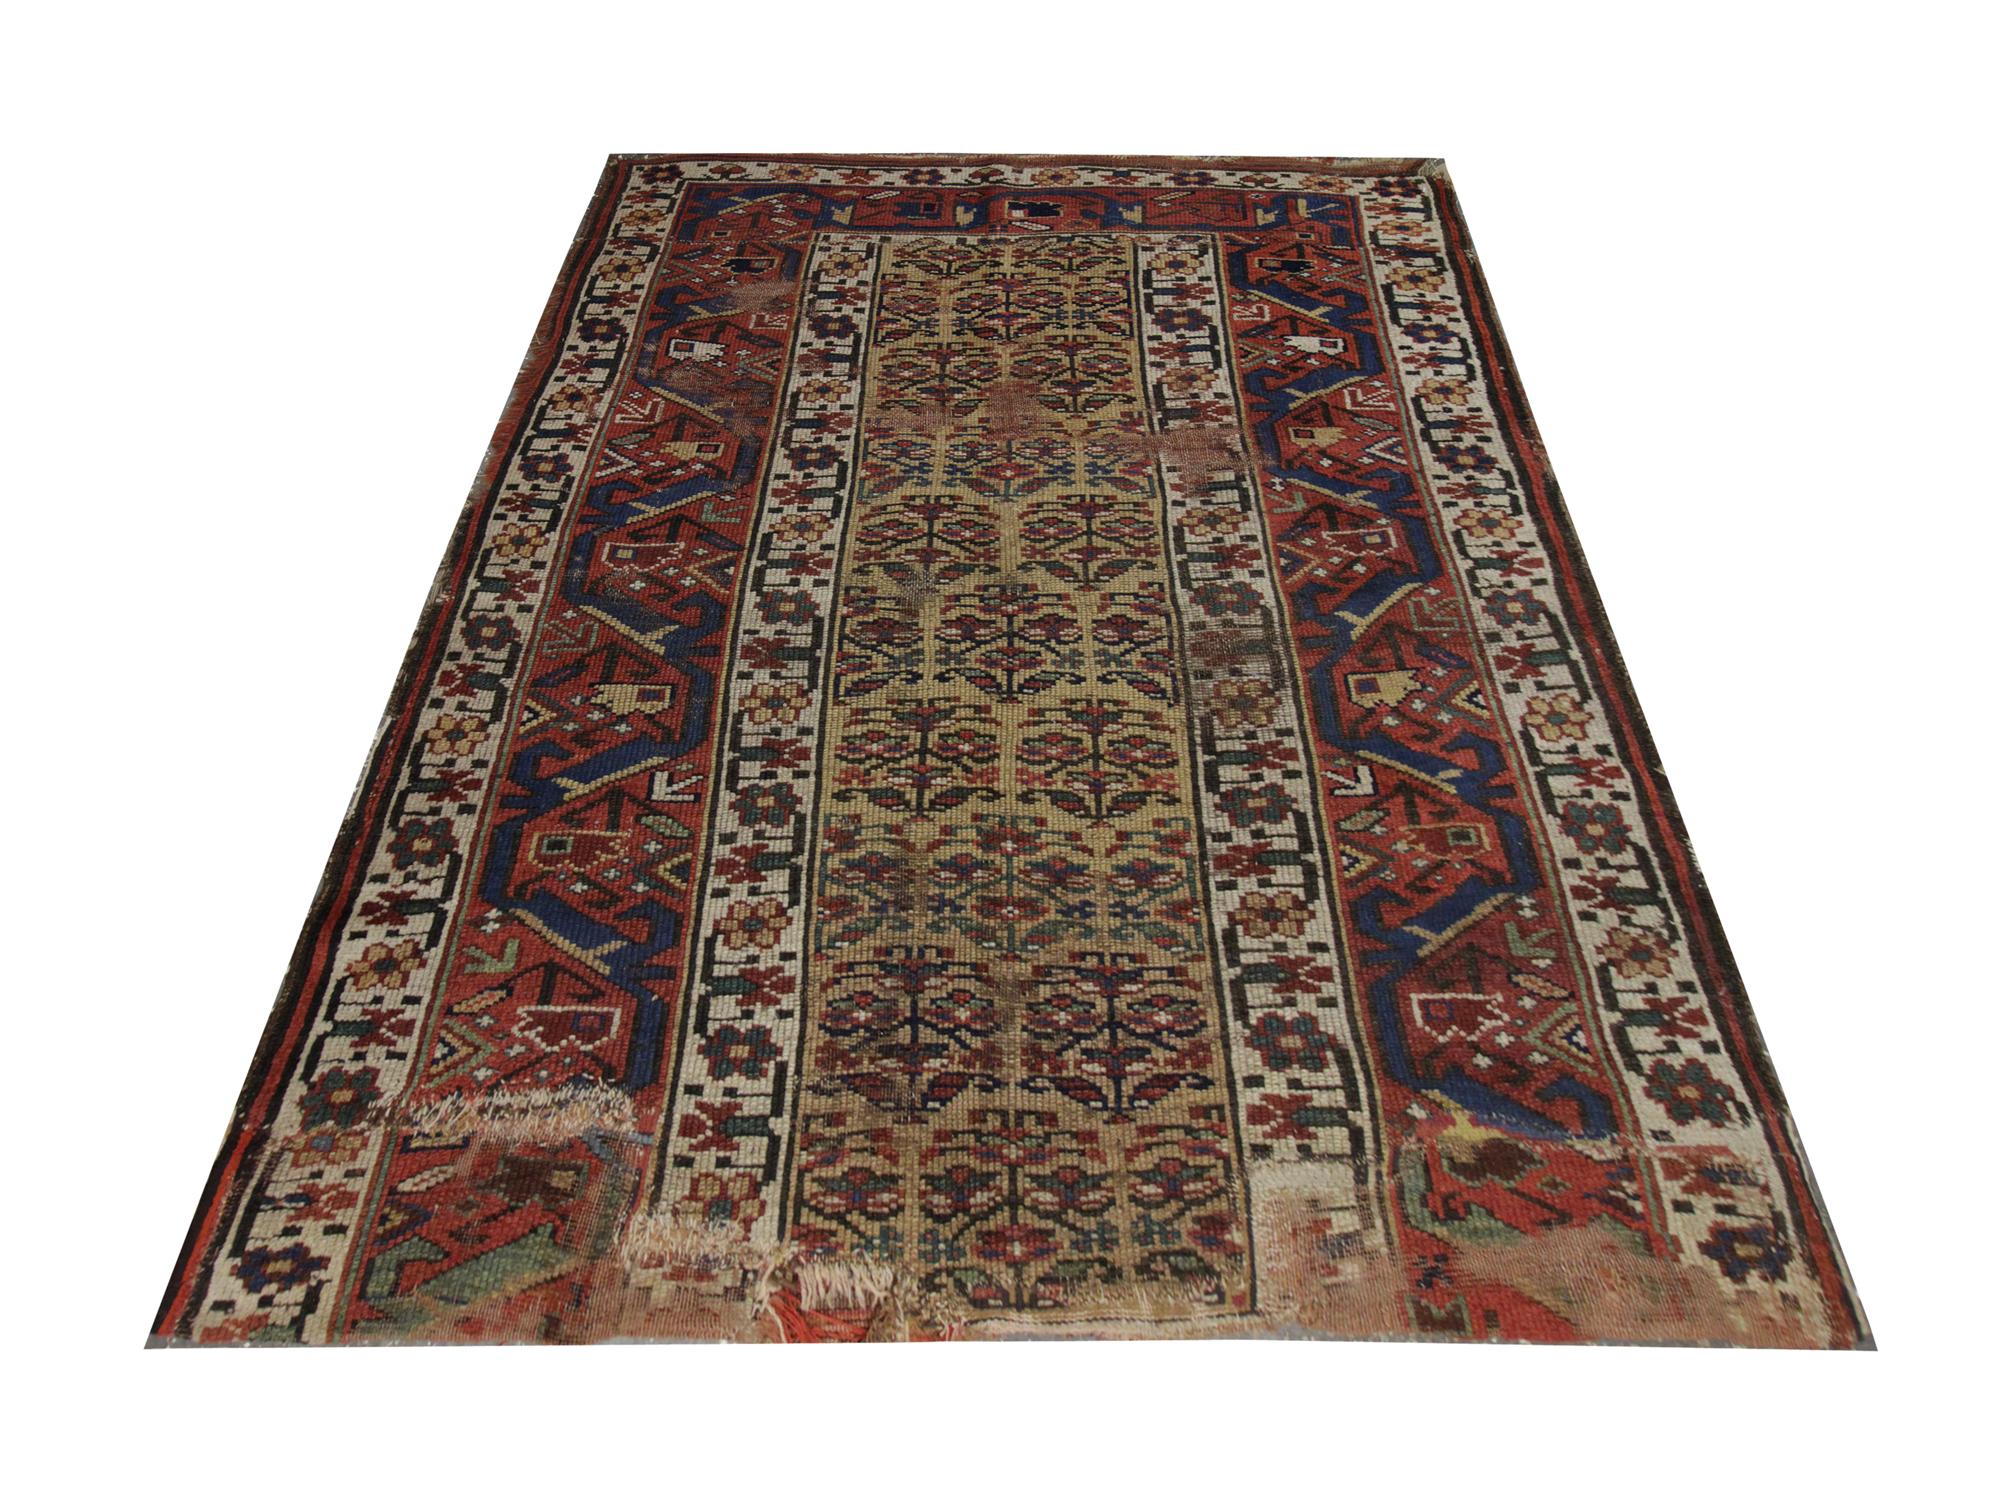 This wool rug is a great example of Caucasian rugs in the 1880s. Intricately woven by hand, this fine wool rug features an oriental floral design.
The central pattern has been woven on a cream background with blue, red, and brown accents that make